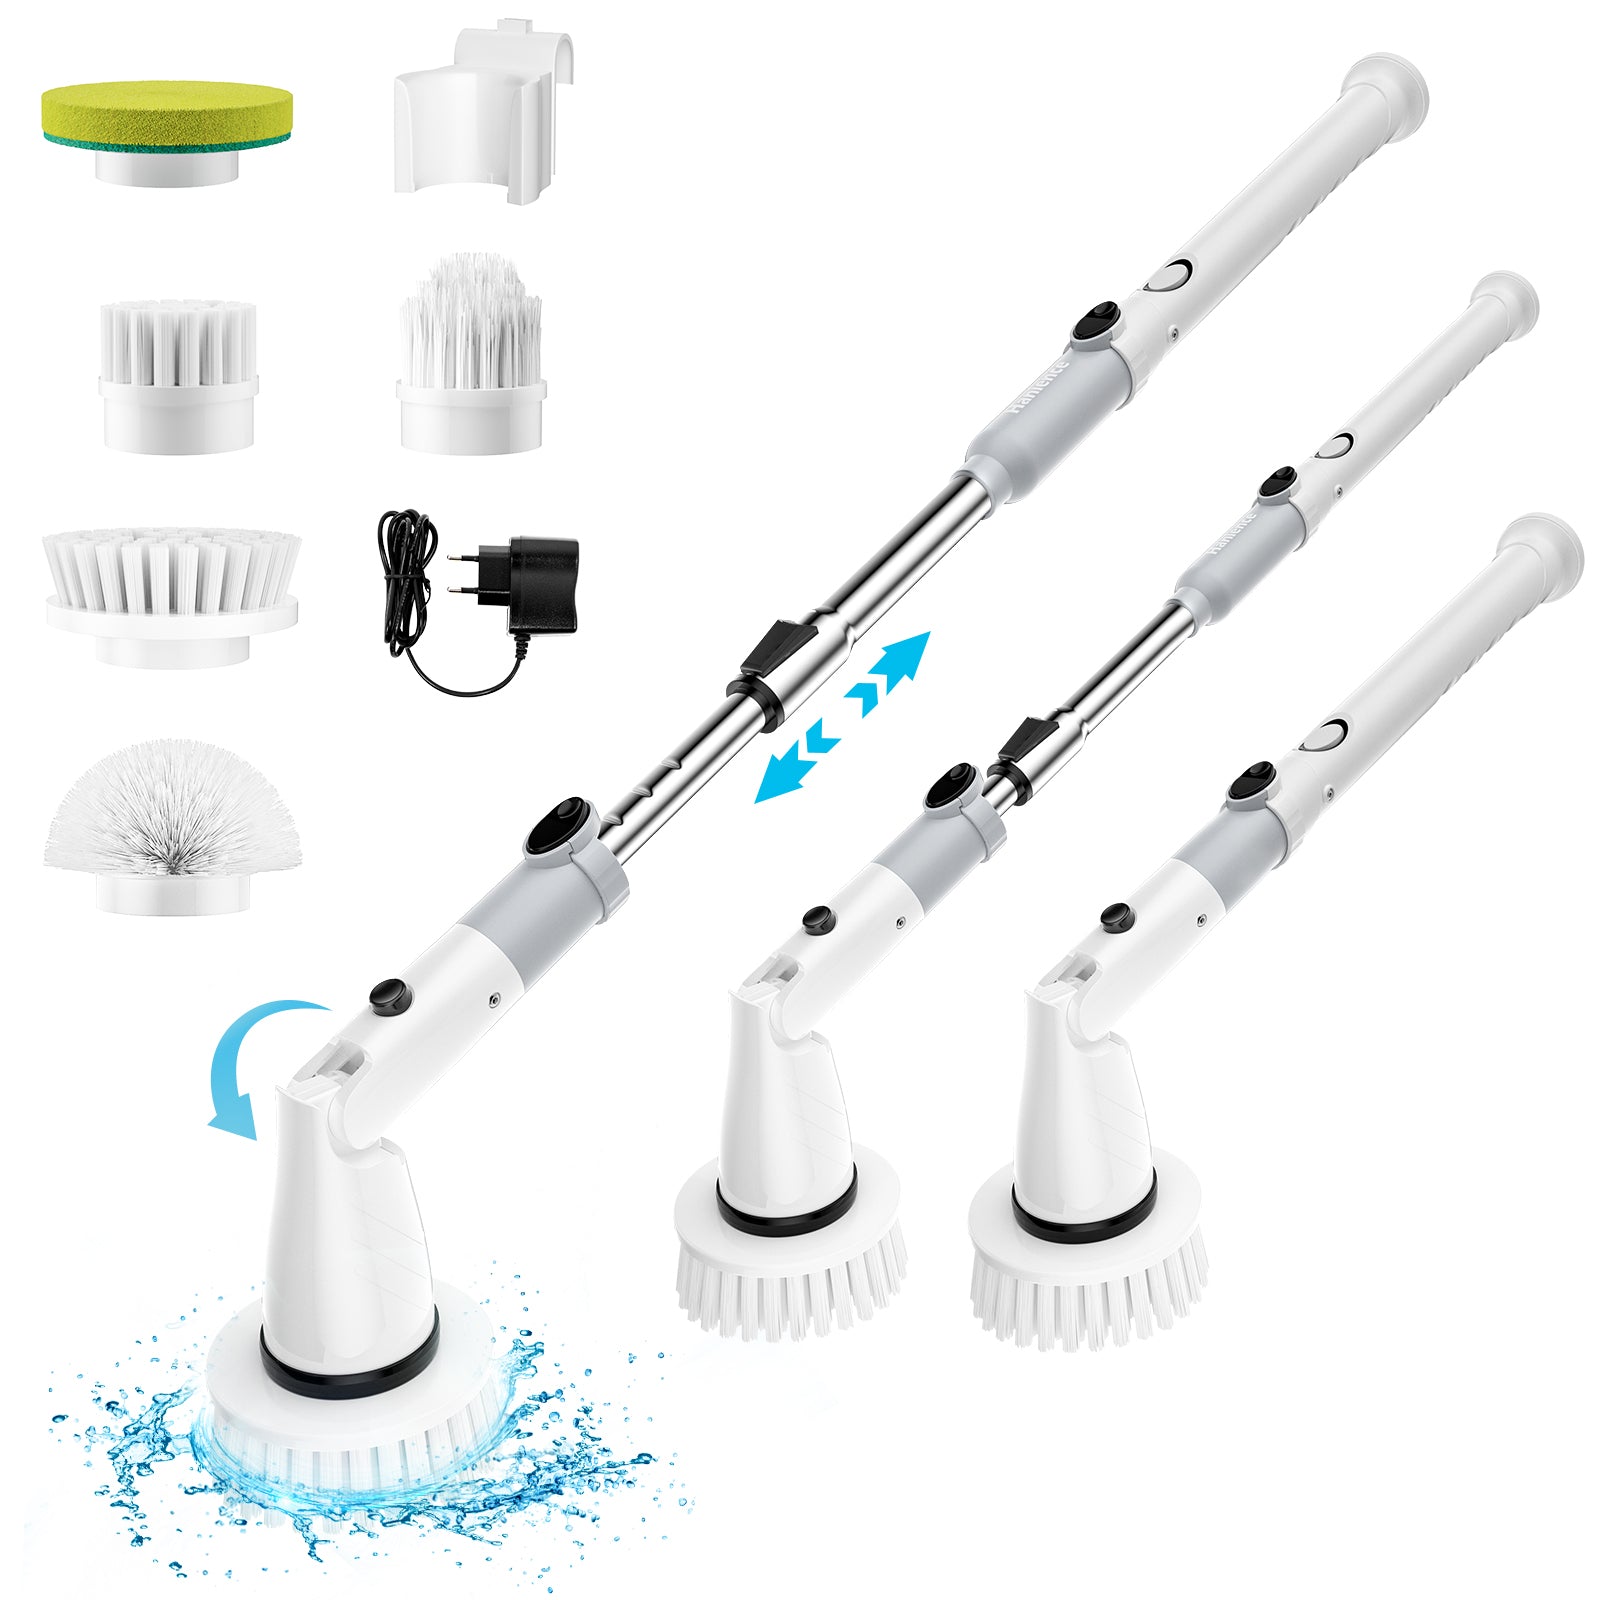 Electric Household Cleaning Brush Power Spin Scrubber 8 In 1